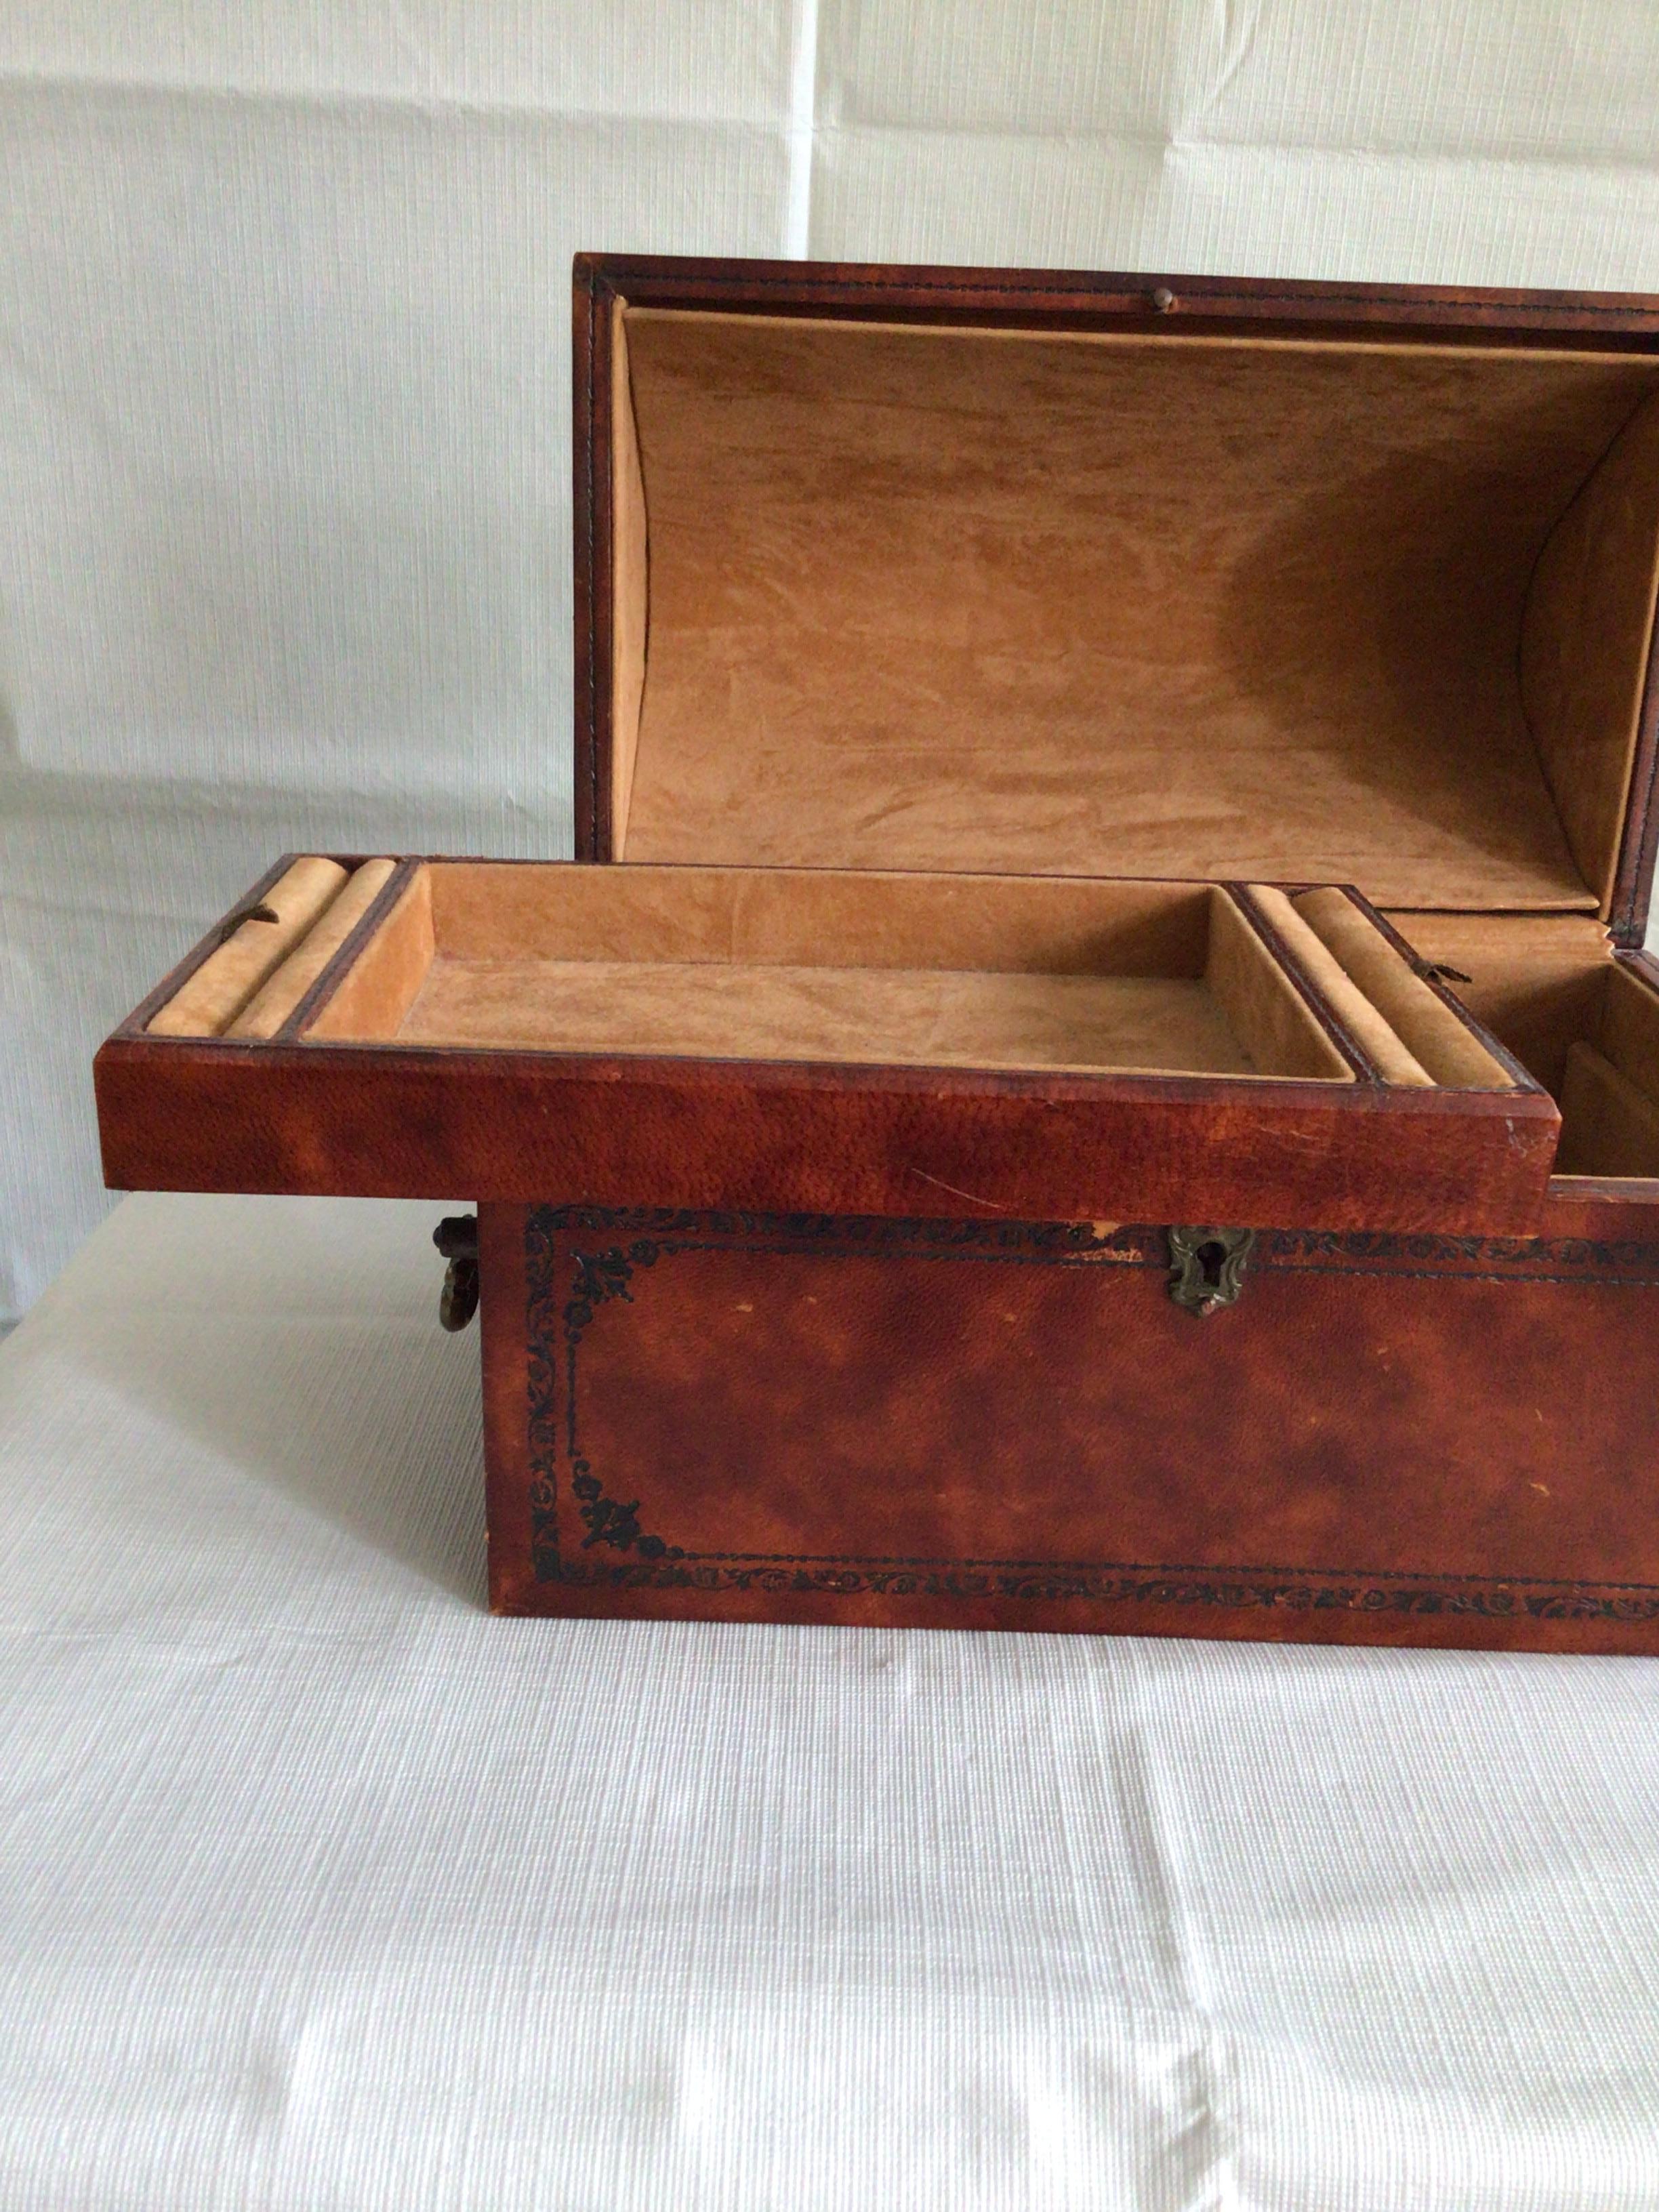 1960s Italian Leather Jewelry Box with Metal Handles For Sale 3